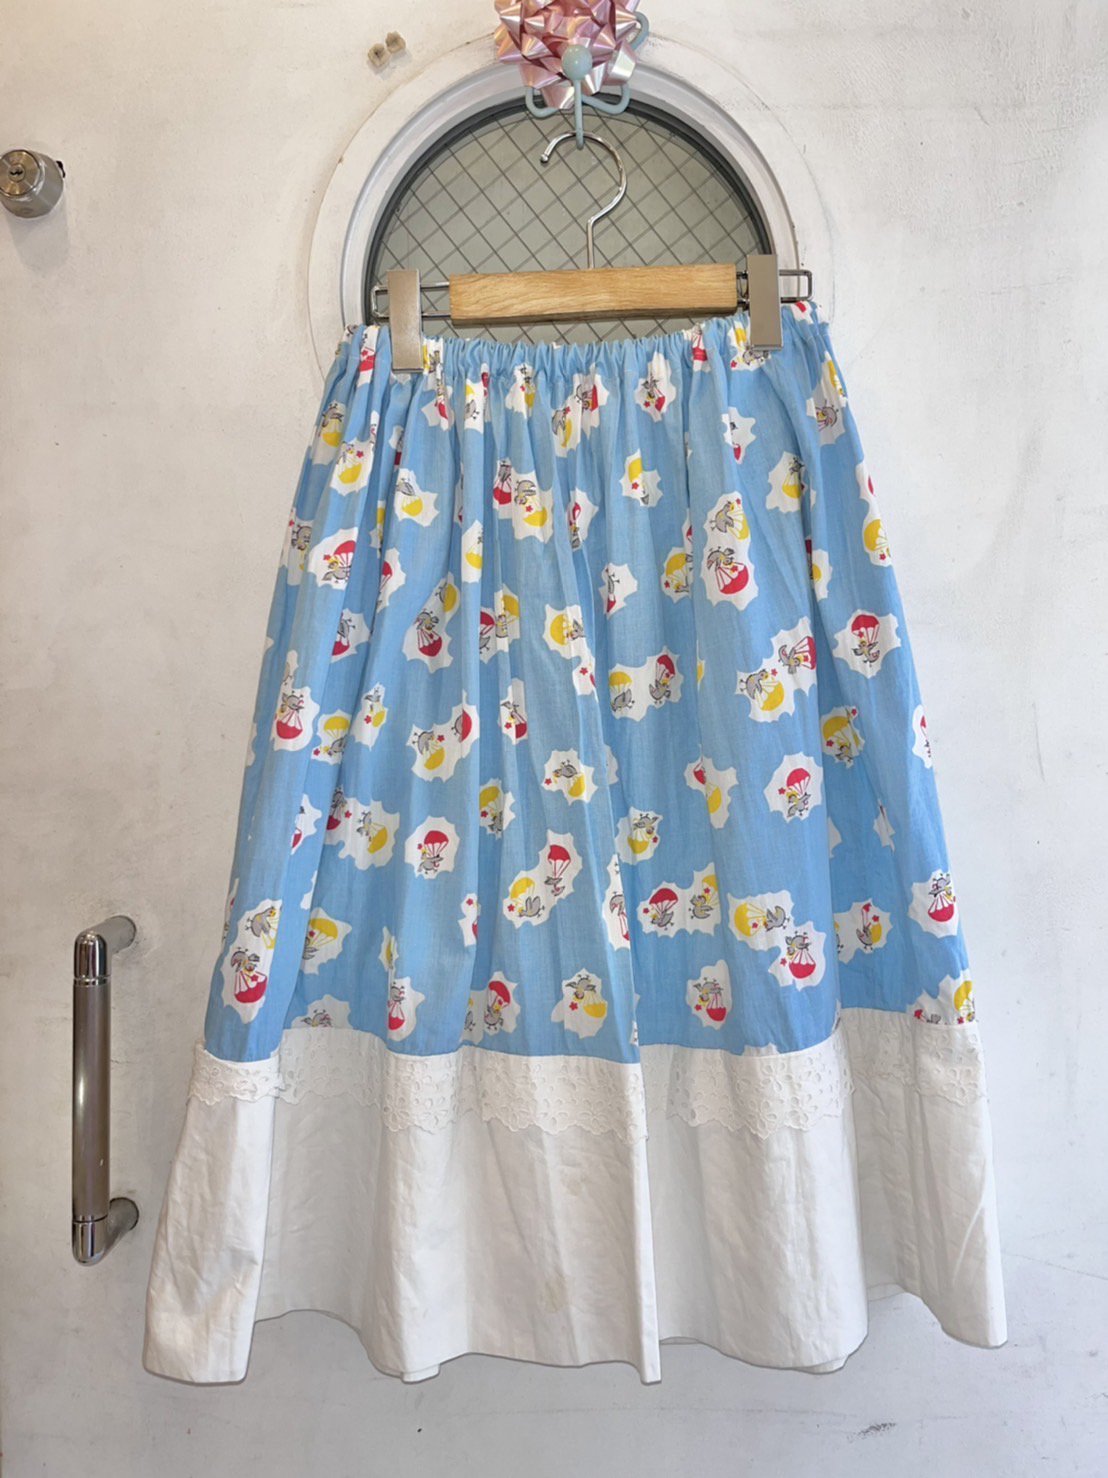 <img class='new_mark_img1' src='https://img.shop-pro.jp/img/new/icons20.gif' style='border:none;display:inline;margin:0px;padding:0px;width:auto;' />《SALE》bird skirt